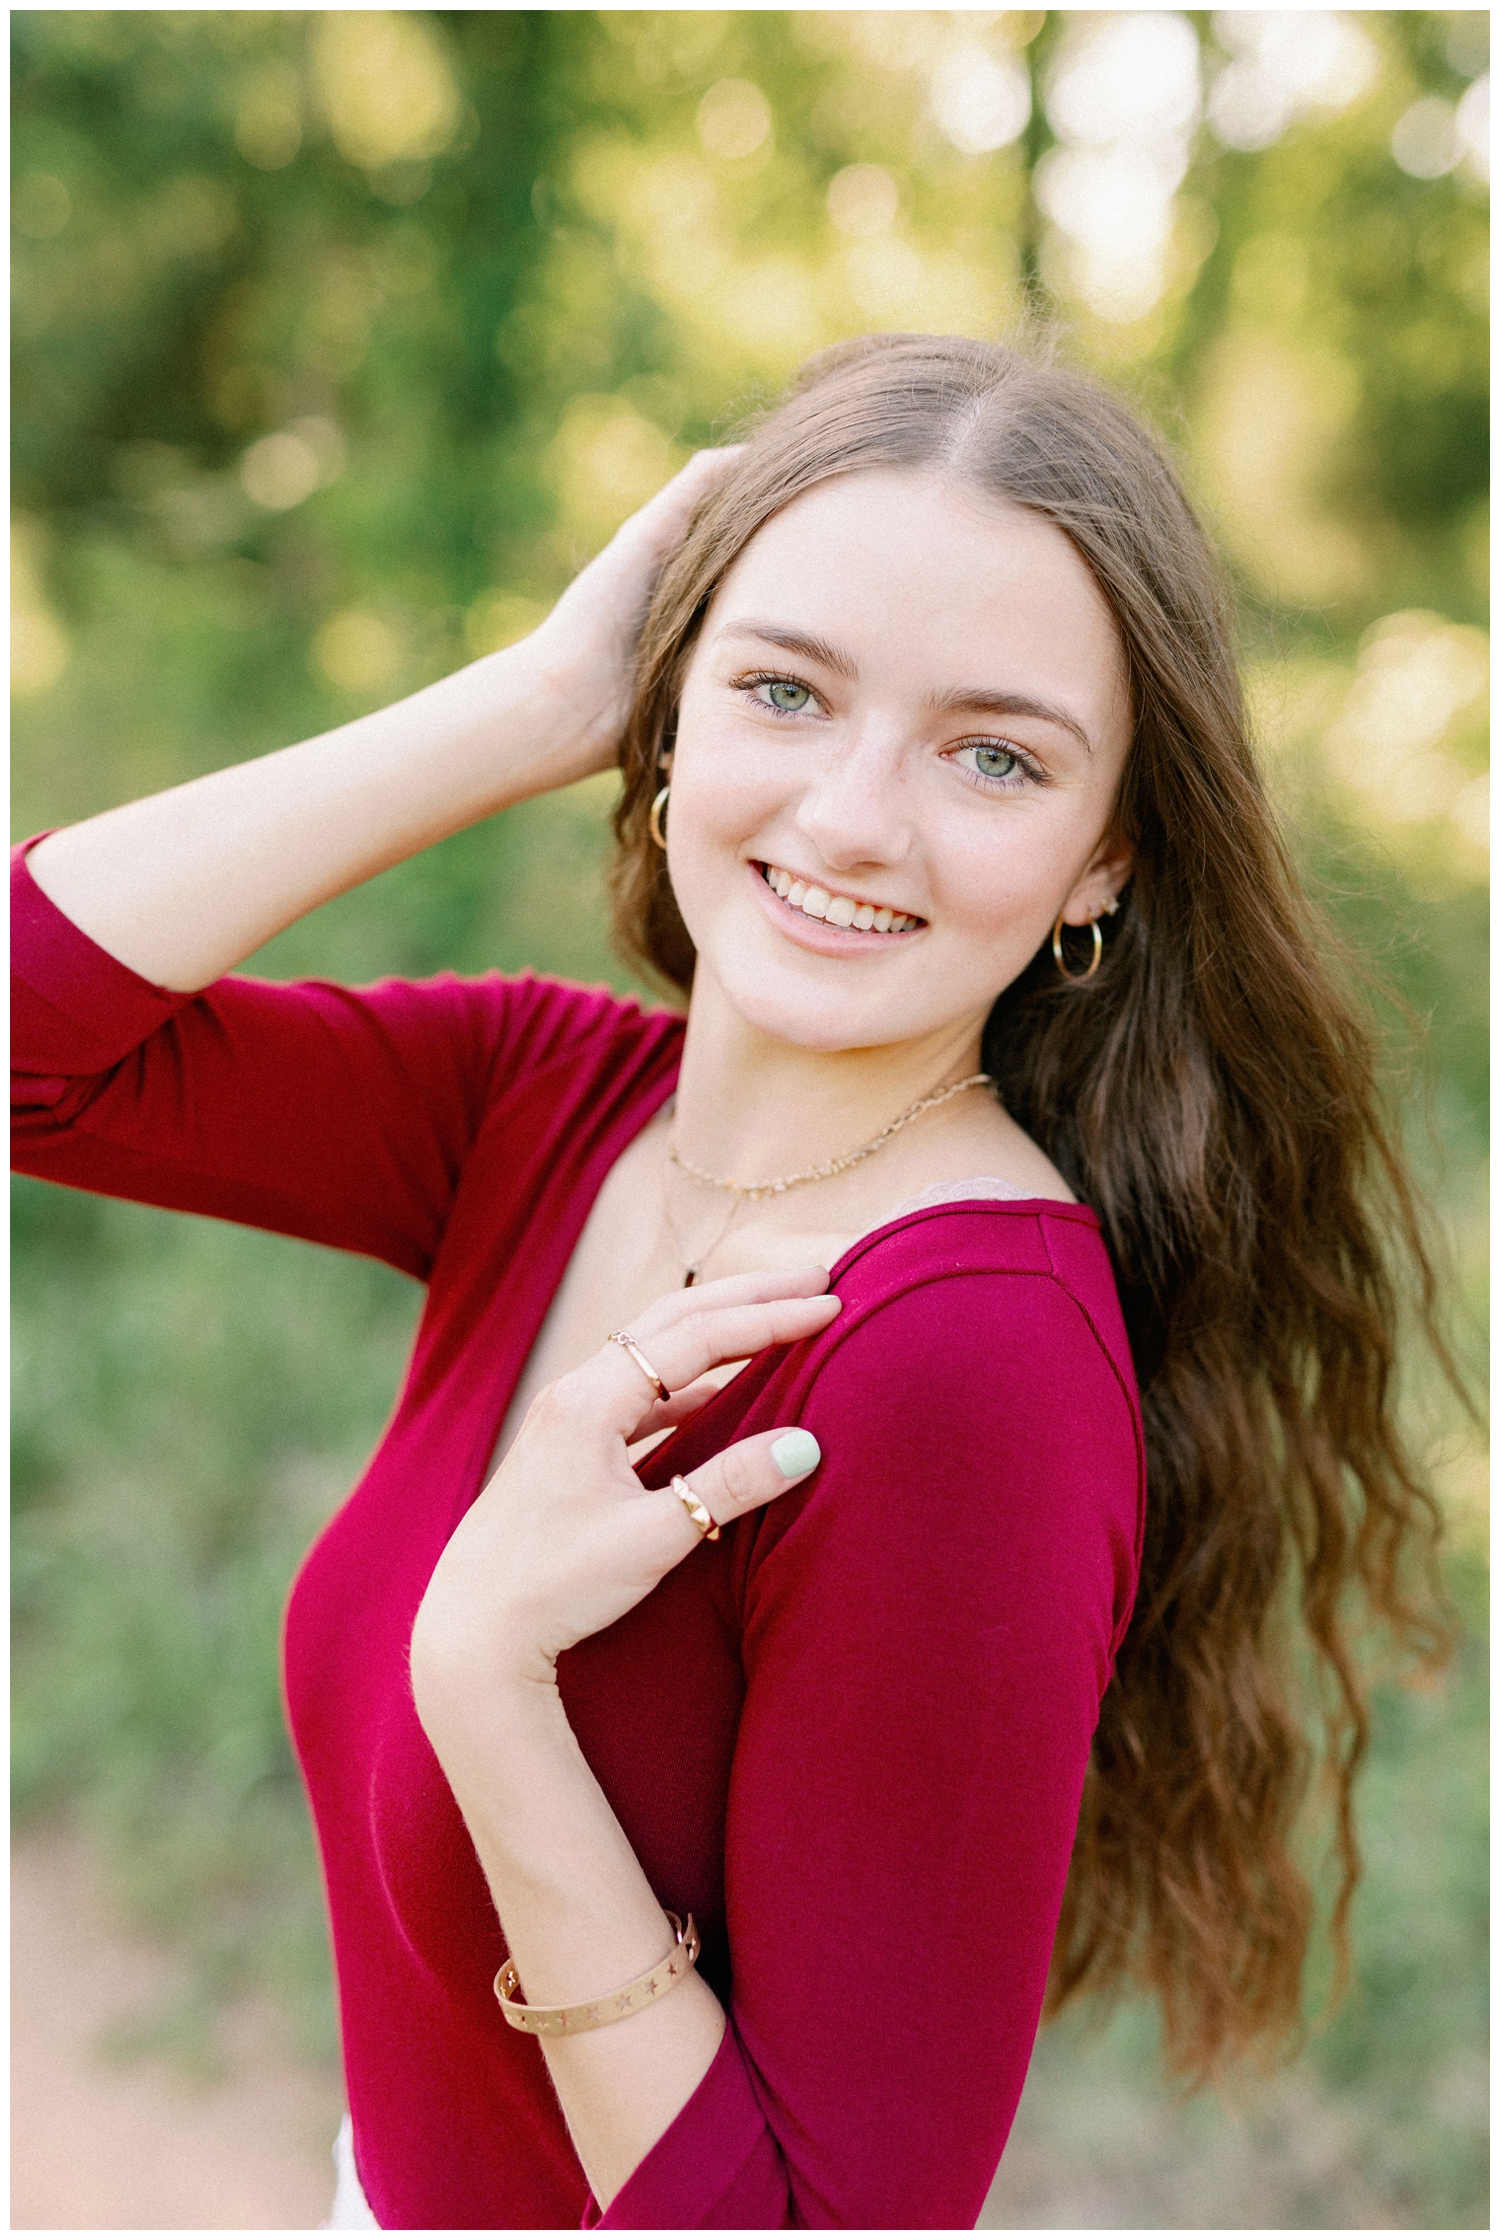 Houston garden senior session with girl in burgundy top smiling at camera